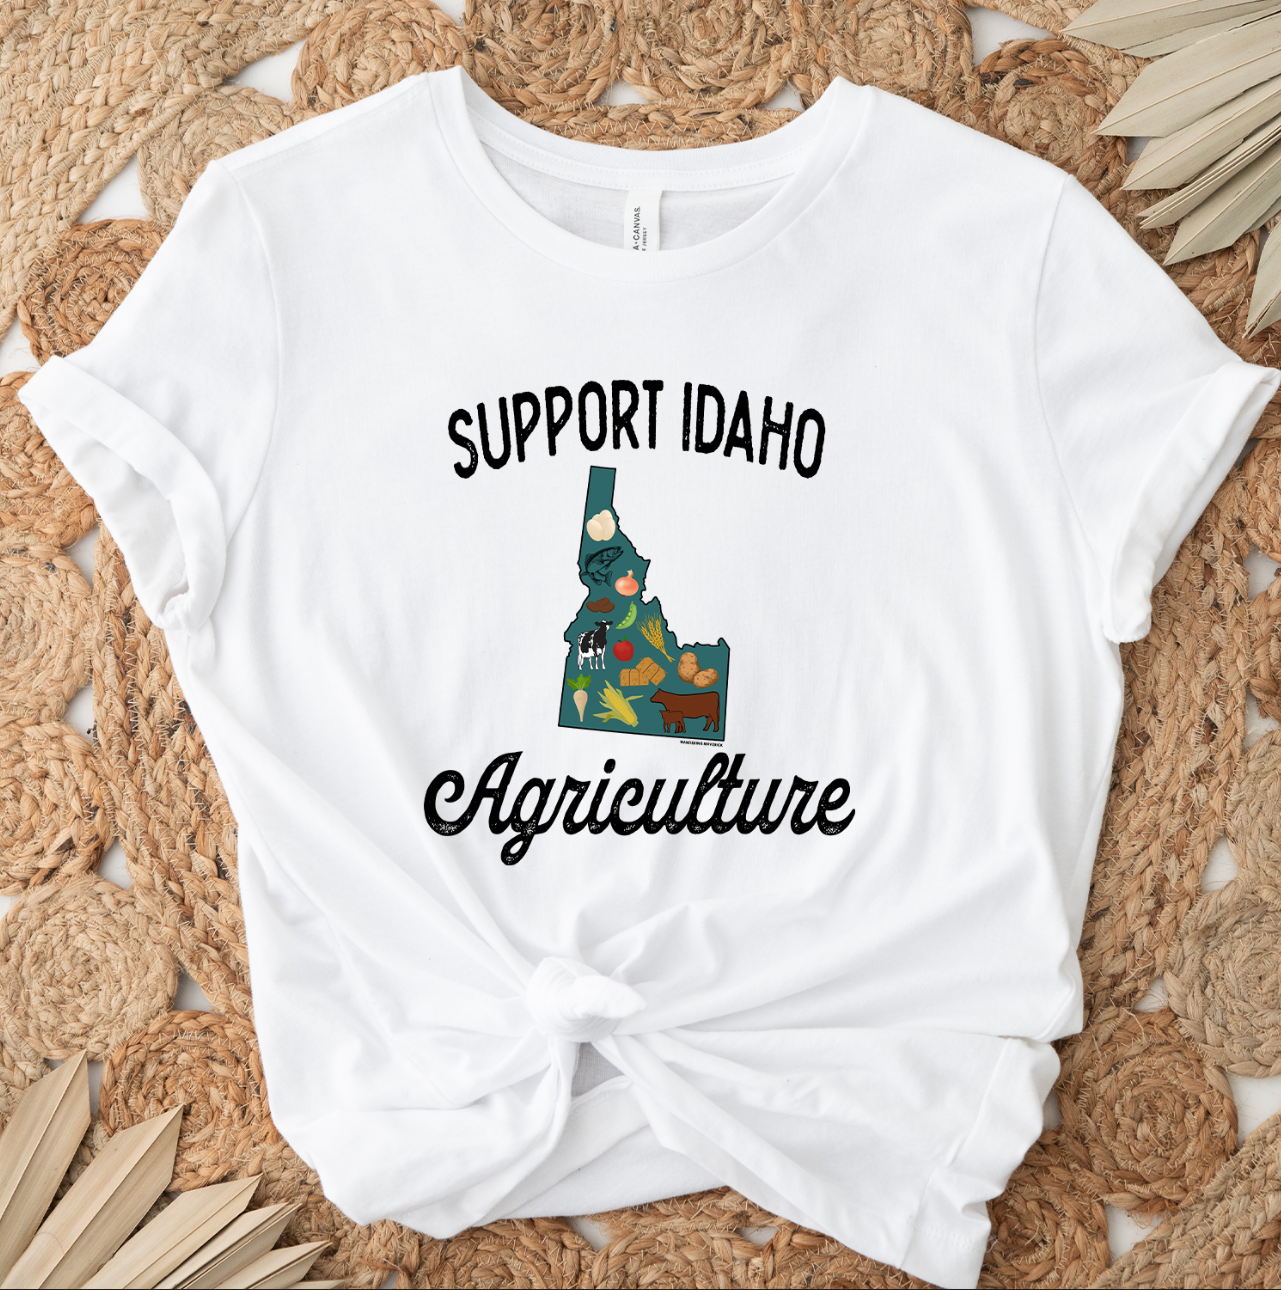 Support Idaho Agriculture T-Shirt (XS-4XL) - Multiple Colors!